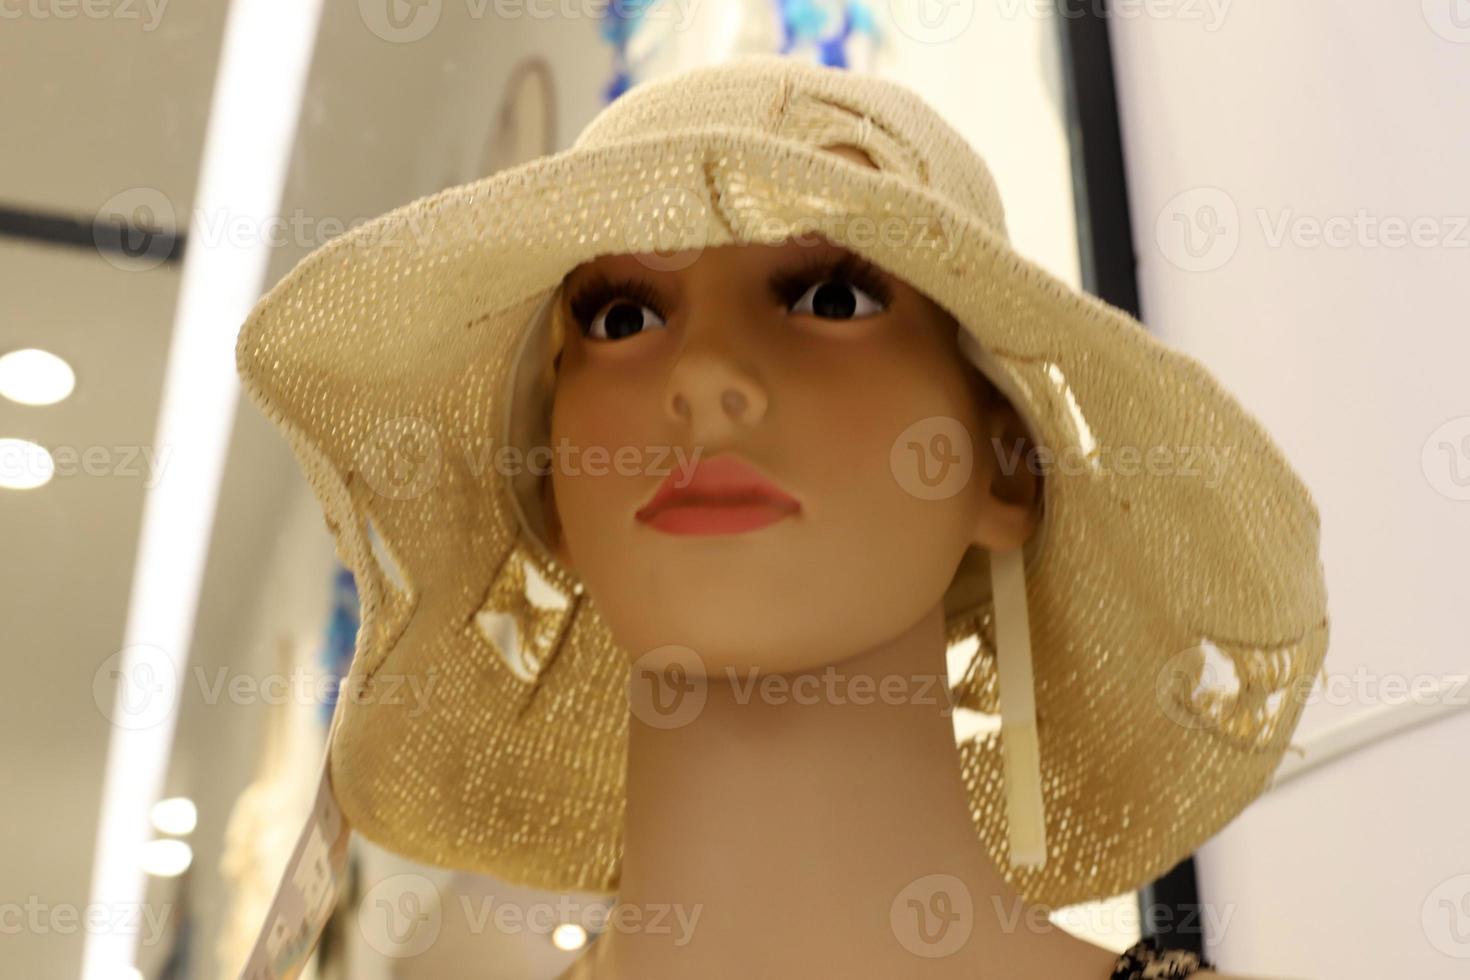 A mannequin is on display in a large store in Israel. photo